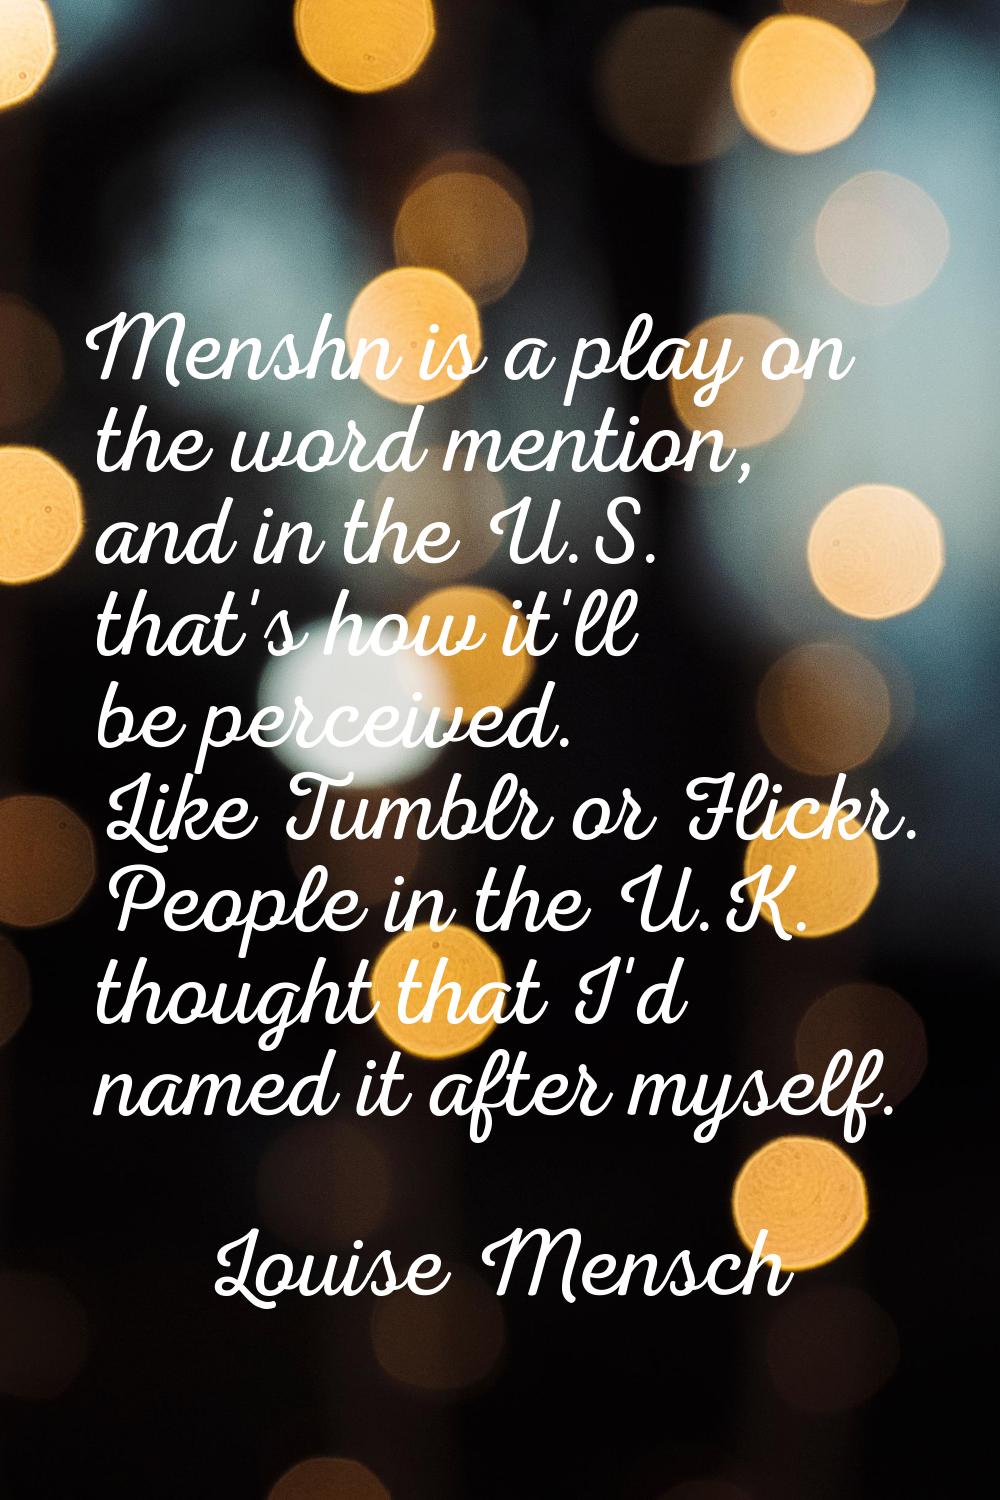 Menshn is a play on the word mention, and in the U.S. that's how it'll be perceived. Like Tumblr or